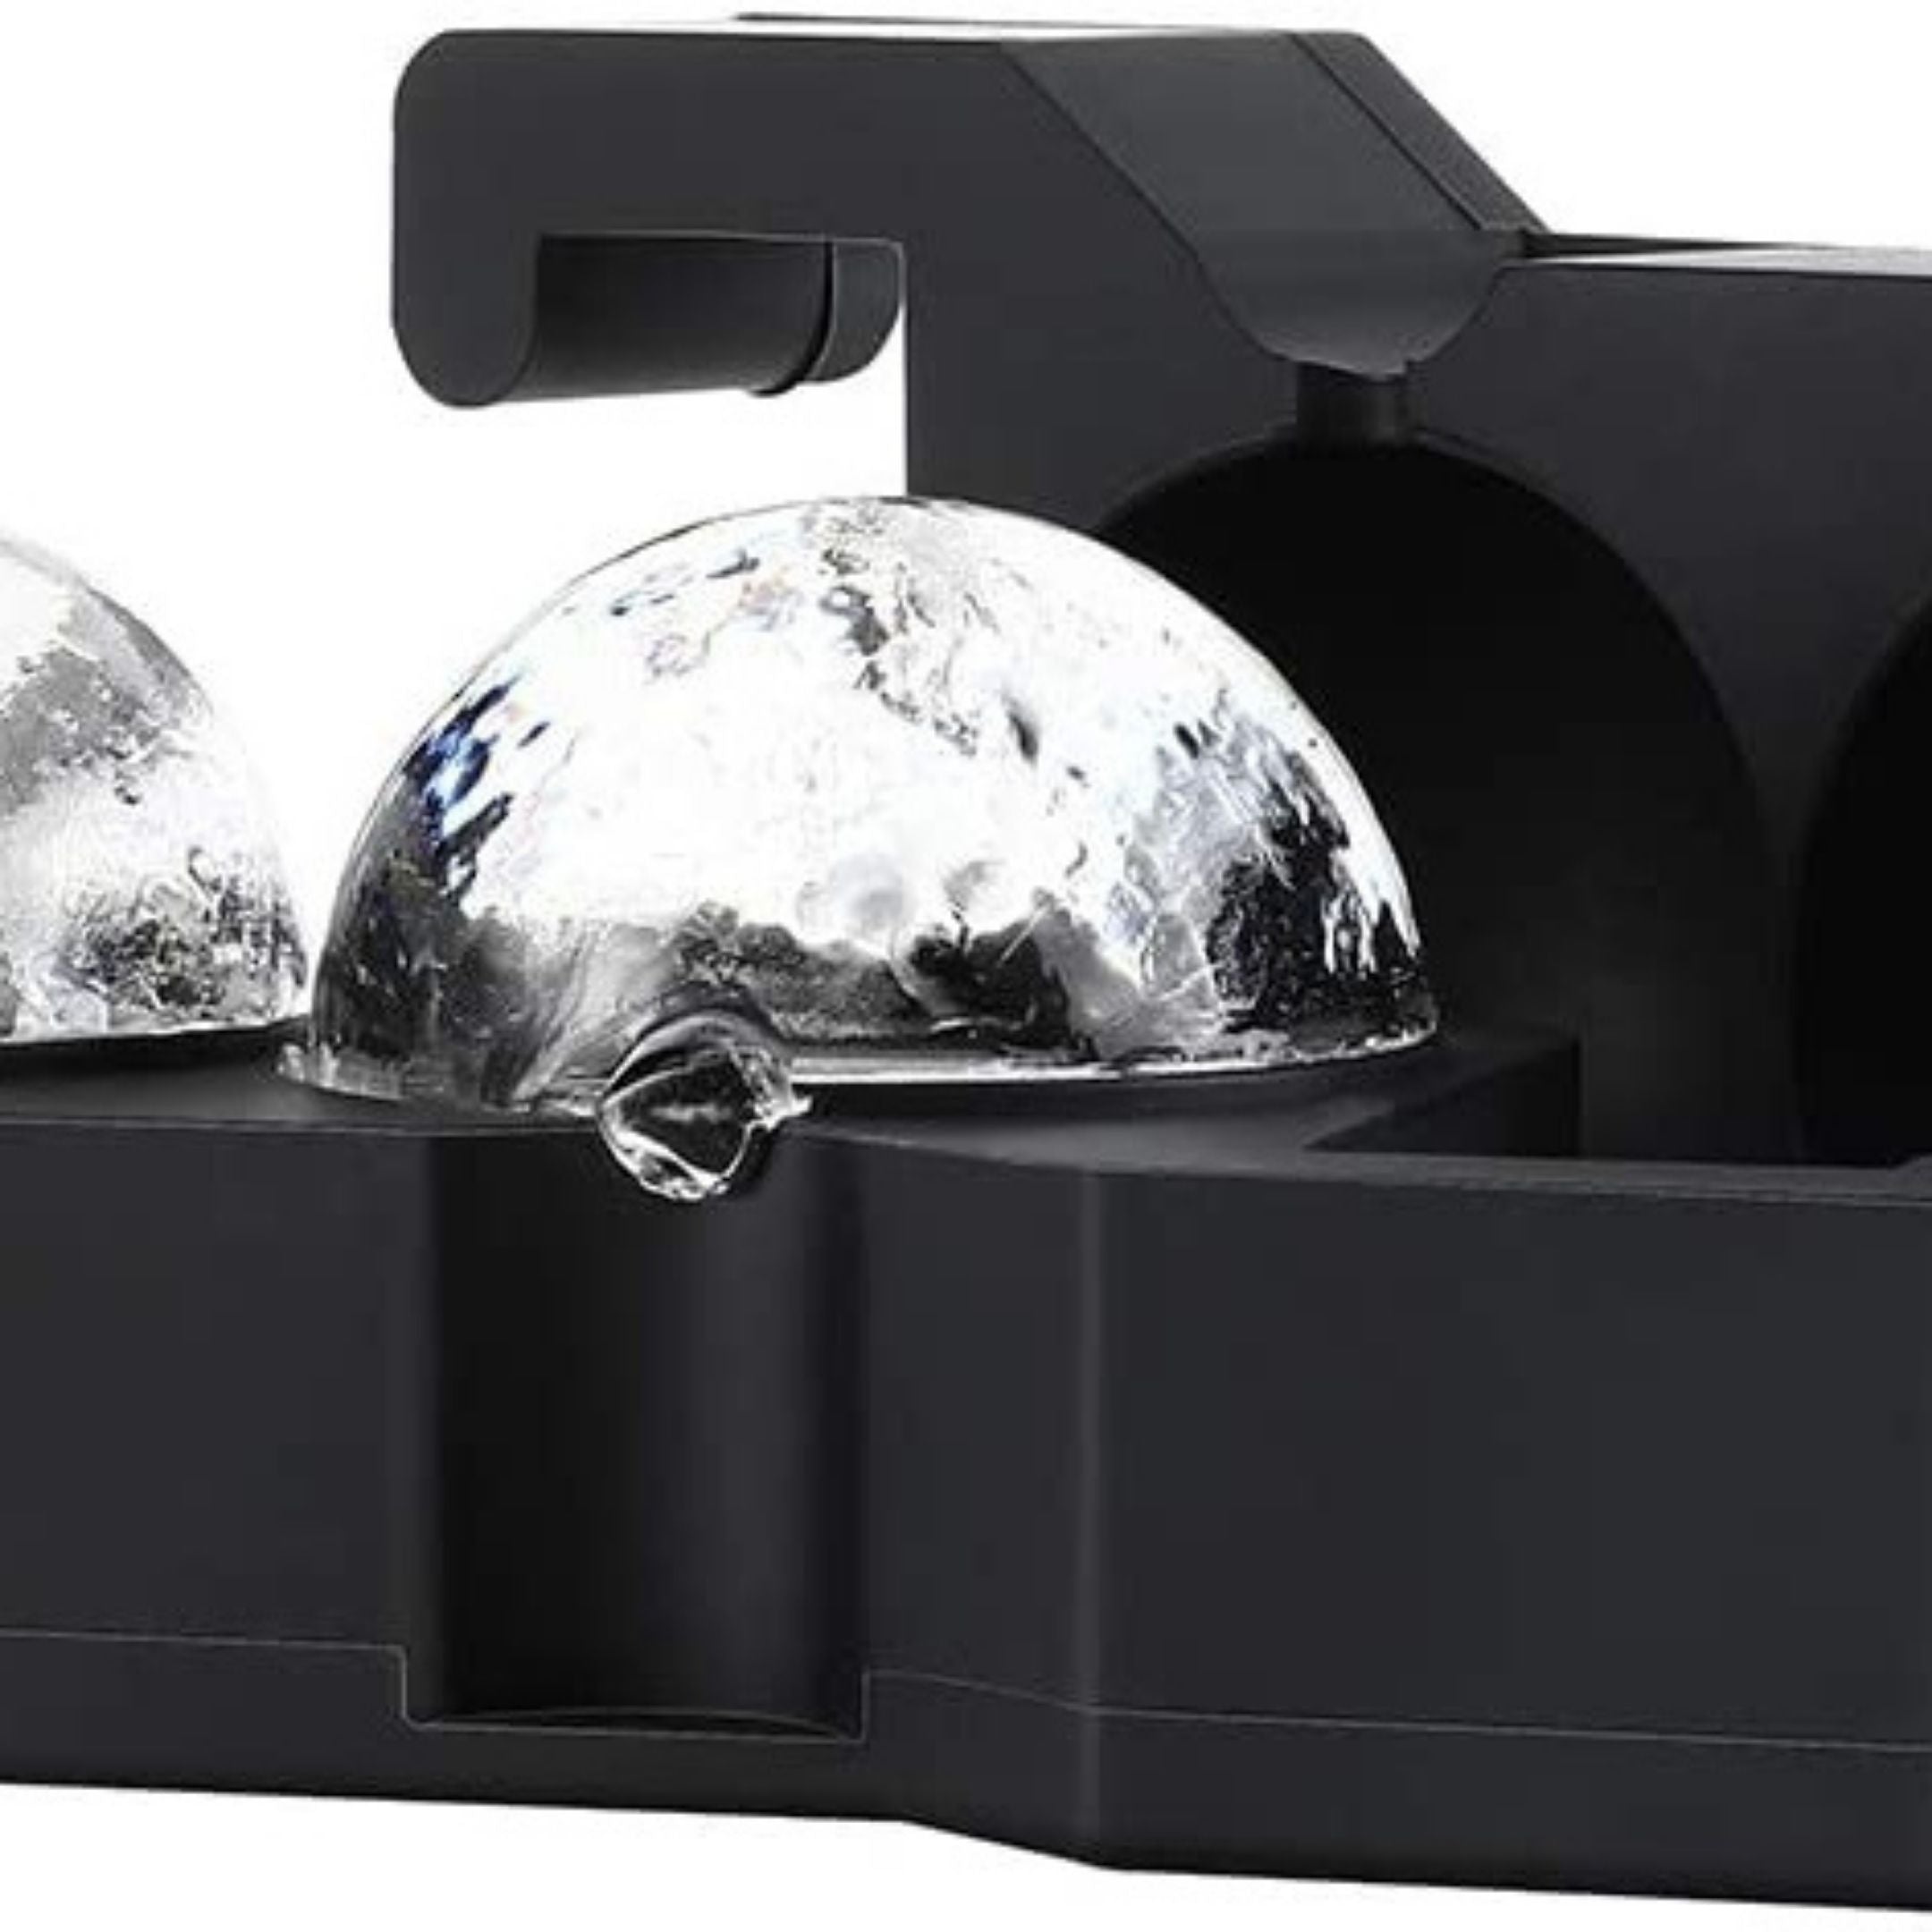 Polar Ice Clear Ice Ball Maker by Sphere Ice Mold for Whiskey (Black)